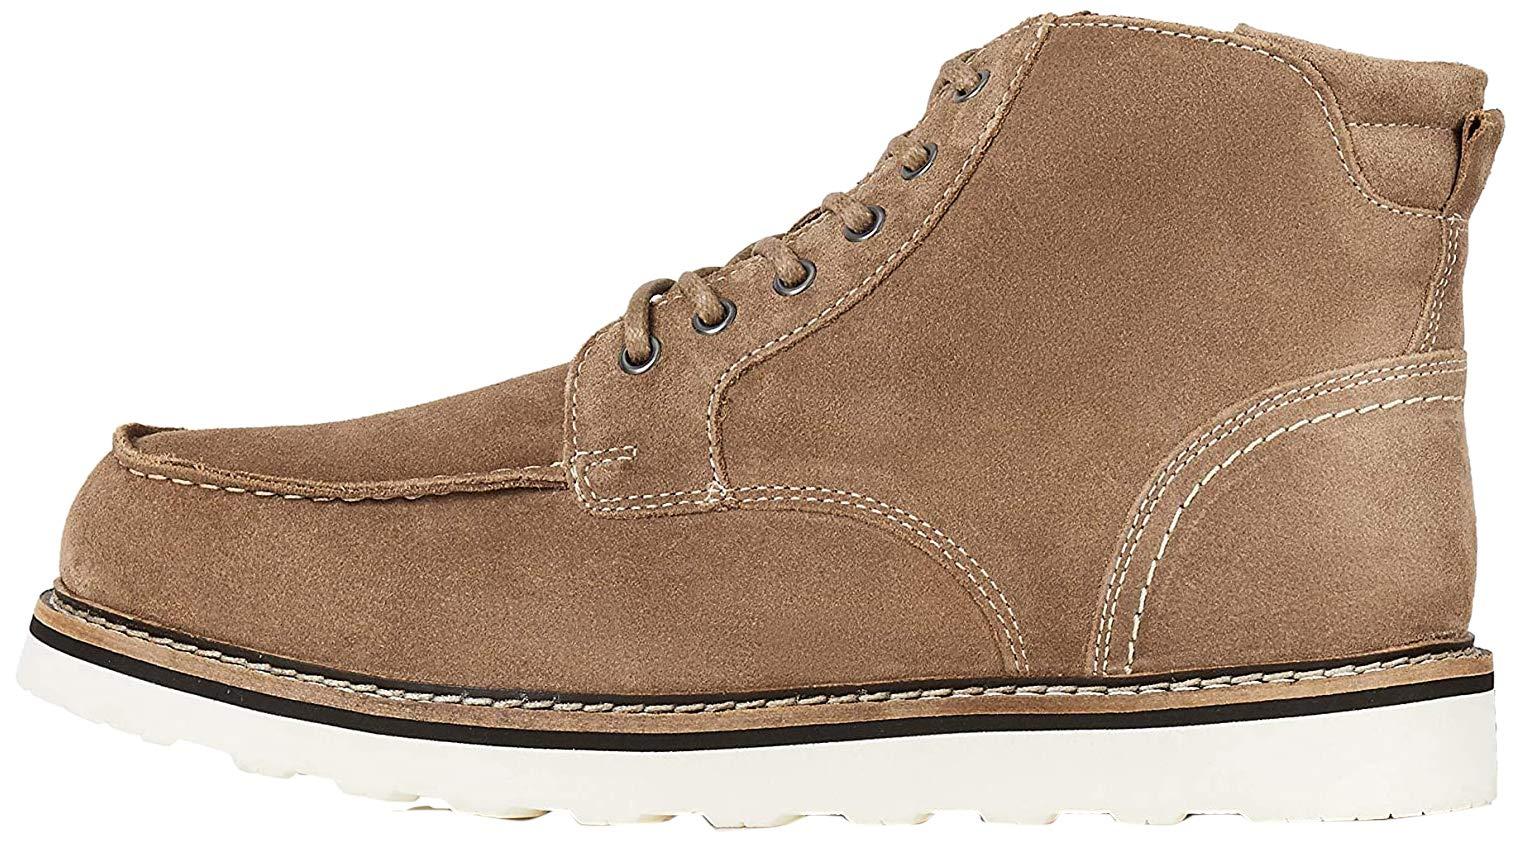 FIND Dax Classic Boots in Beige Dark Taupe (Natural) for Men - Save 58% -  Lyst